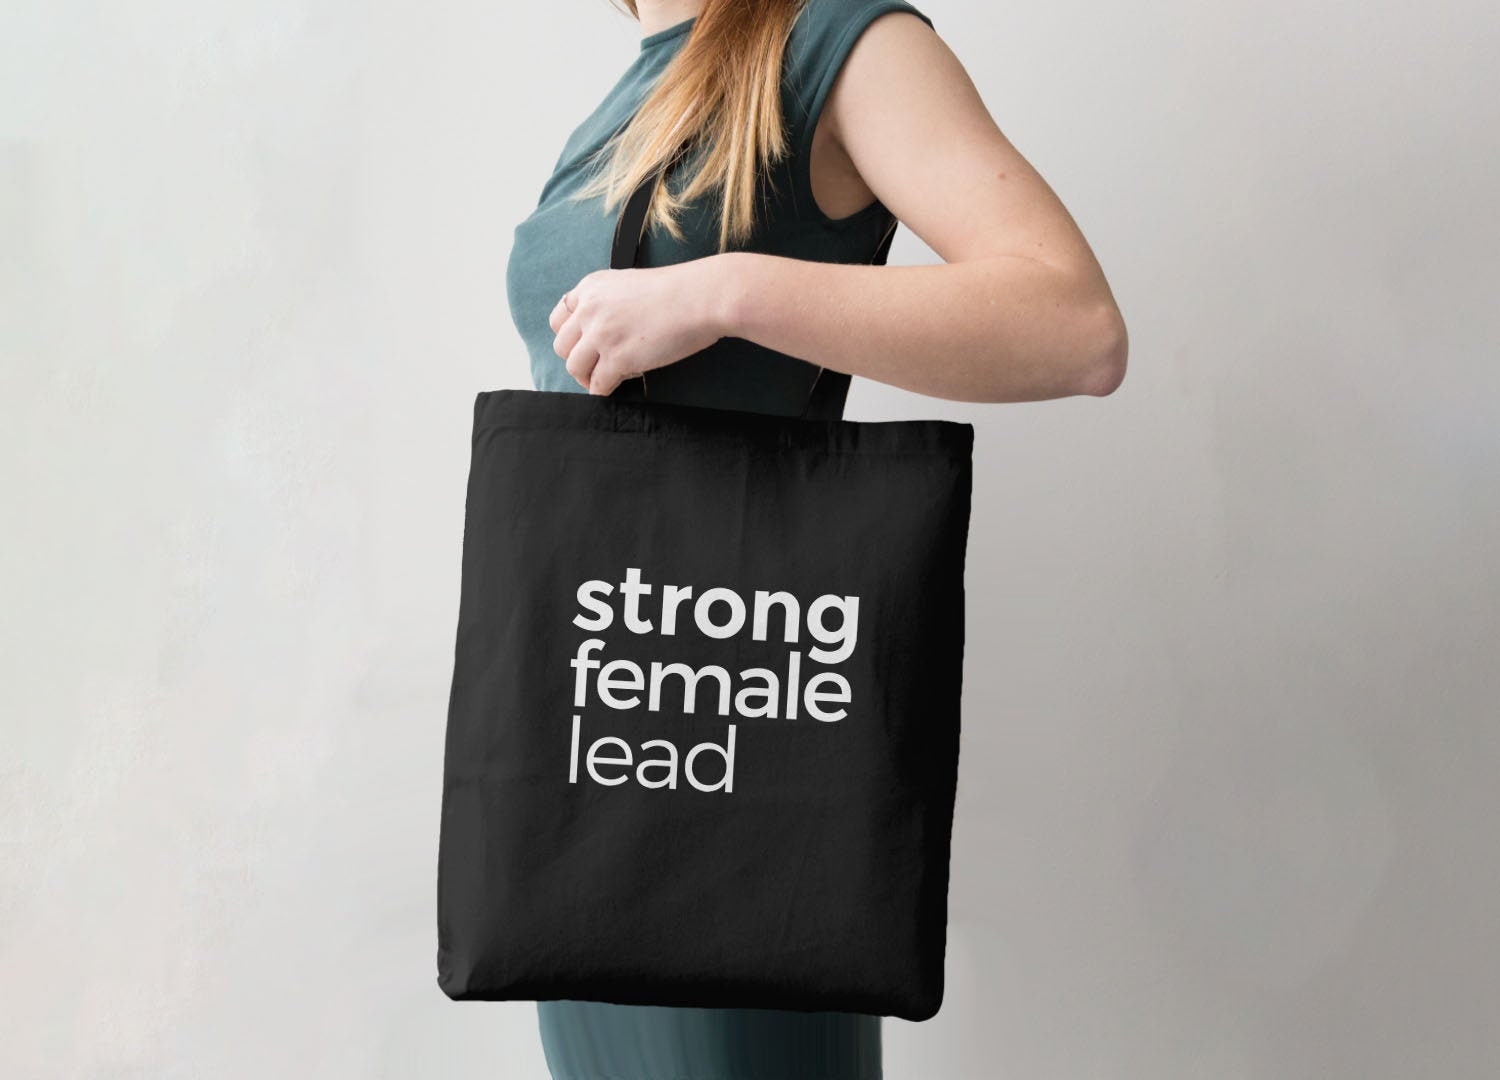 Strong Female Lead Tote Bag, Tote Bag Black by BootsTees